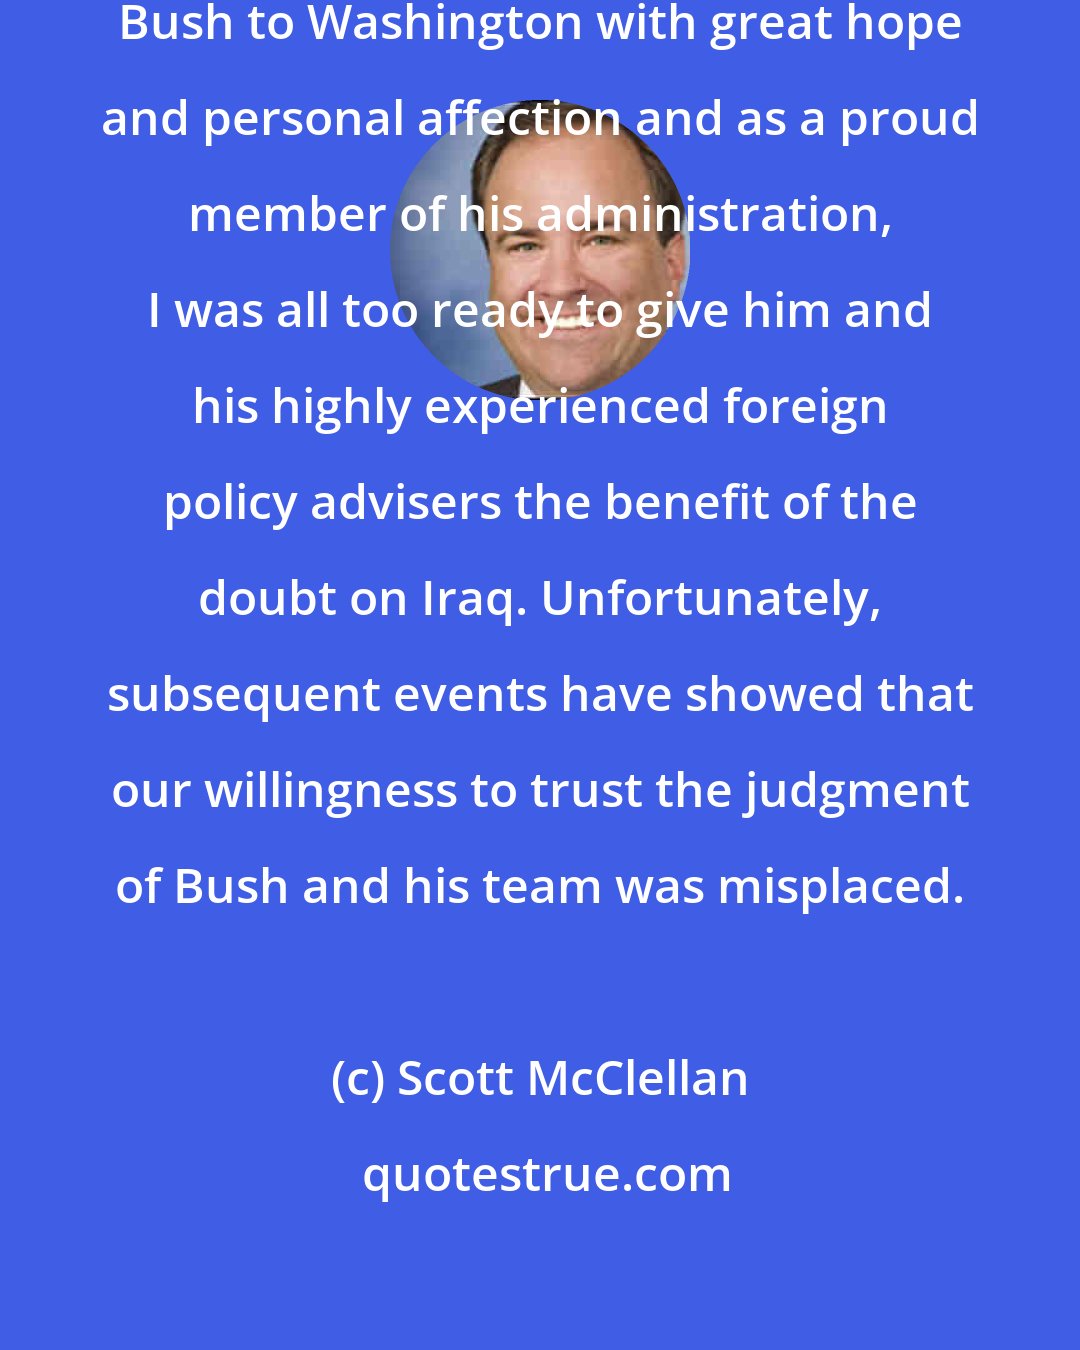 Scott McClellan: As a Texas loyalist who followed Bush to Washington with great hope and personal affection and as a proud member of his administration, I was all too ready to give him and his highly experienced foreign policy advisers the benefit of the doubt on Iraq. Unfortunately, subsequent events have showed that our willingness to trust the judgment of Bush and his team was misplaced.